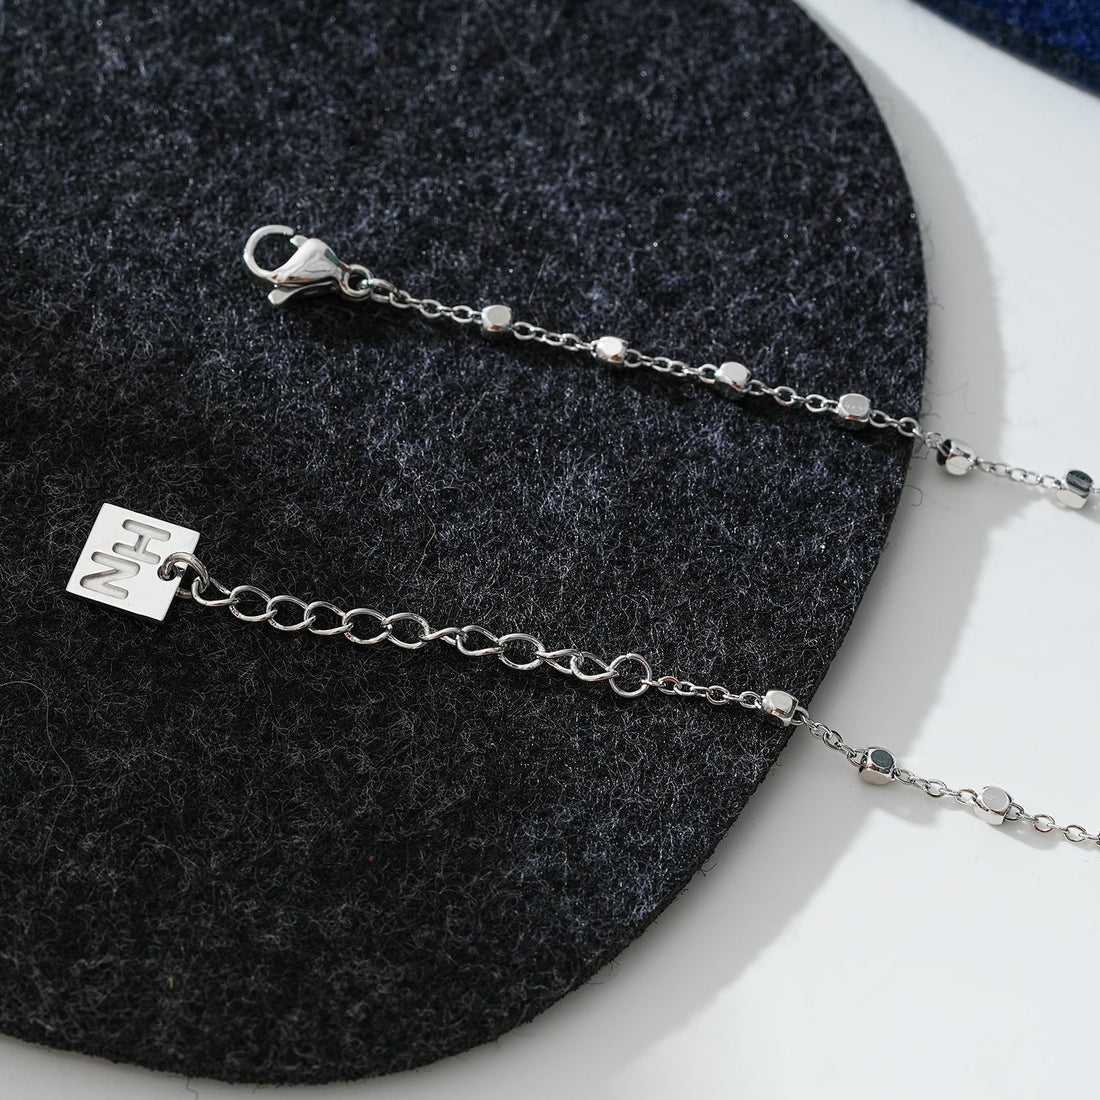 Hackney Nine DEMELZA LG Contemporary Silver Anklet with Delicate Square Beads